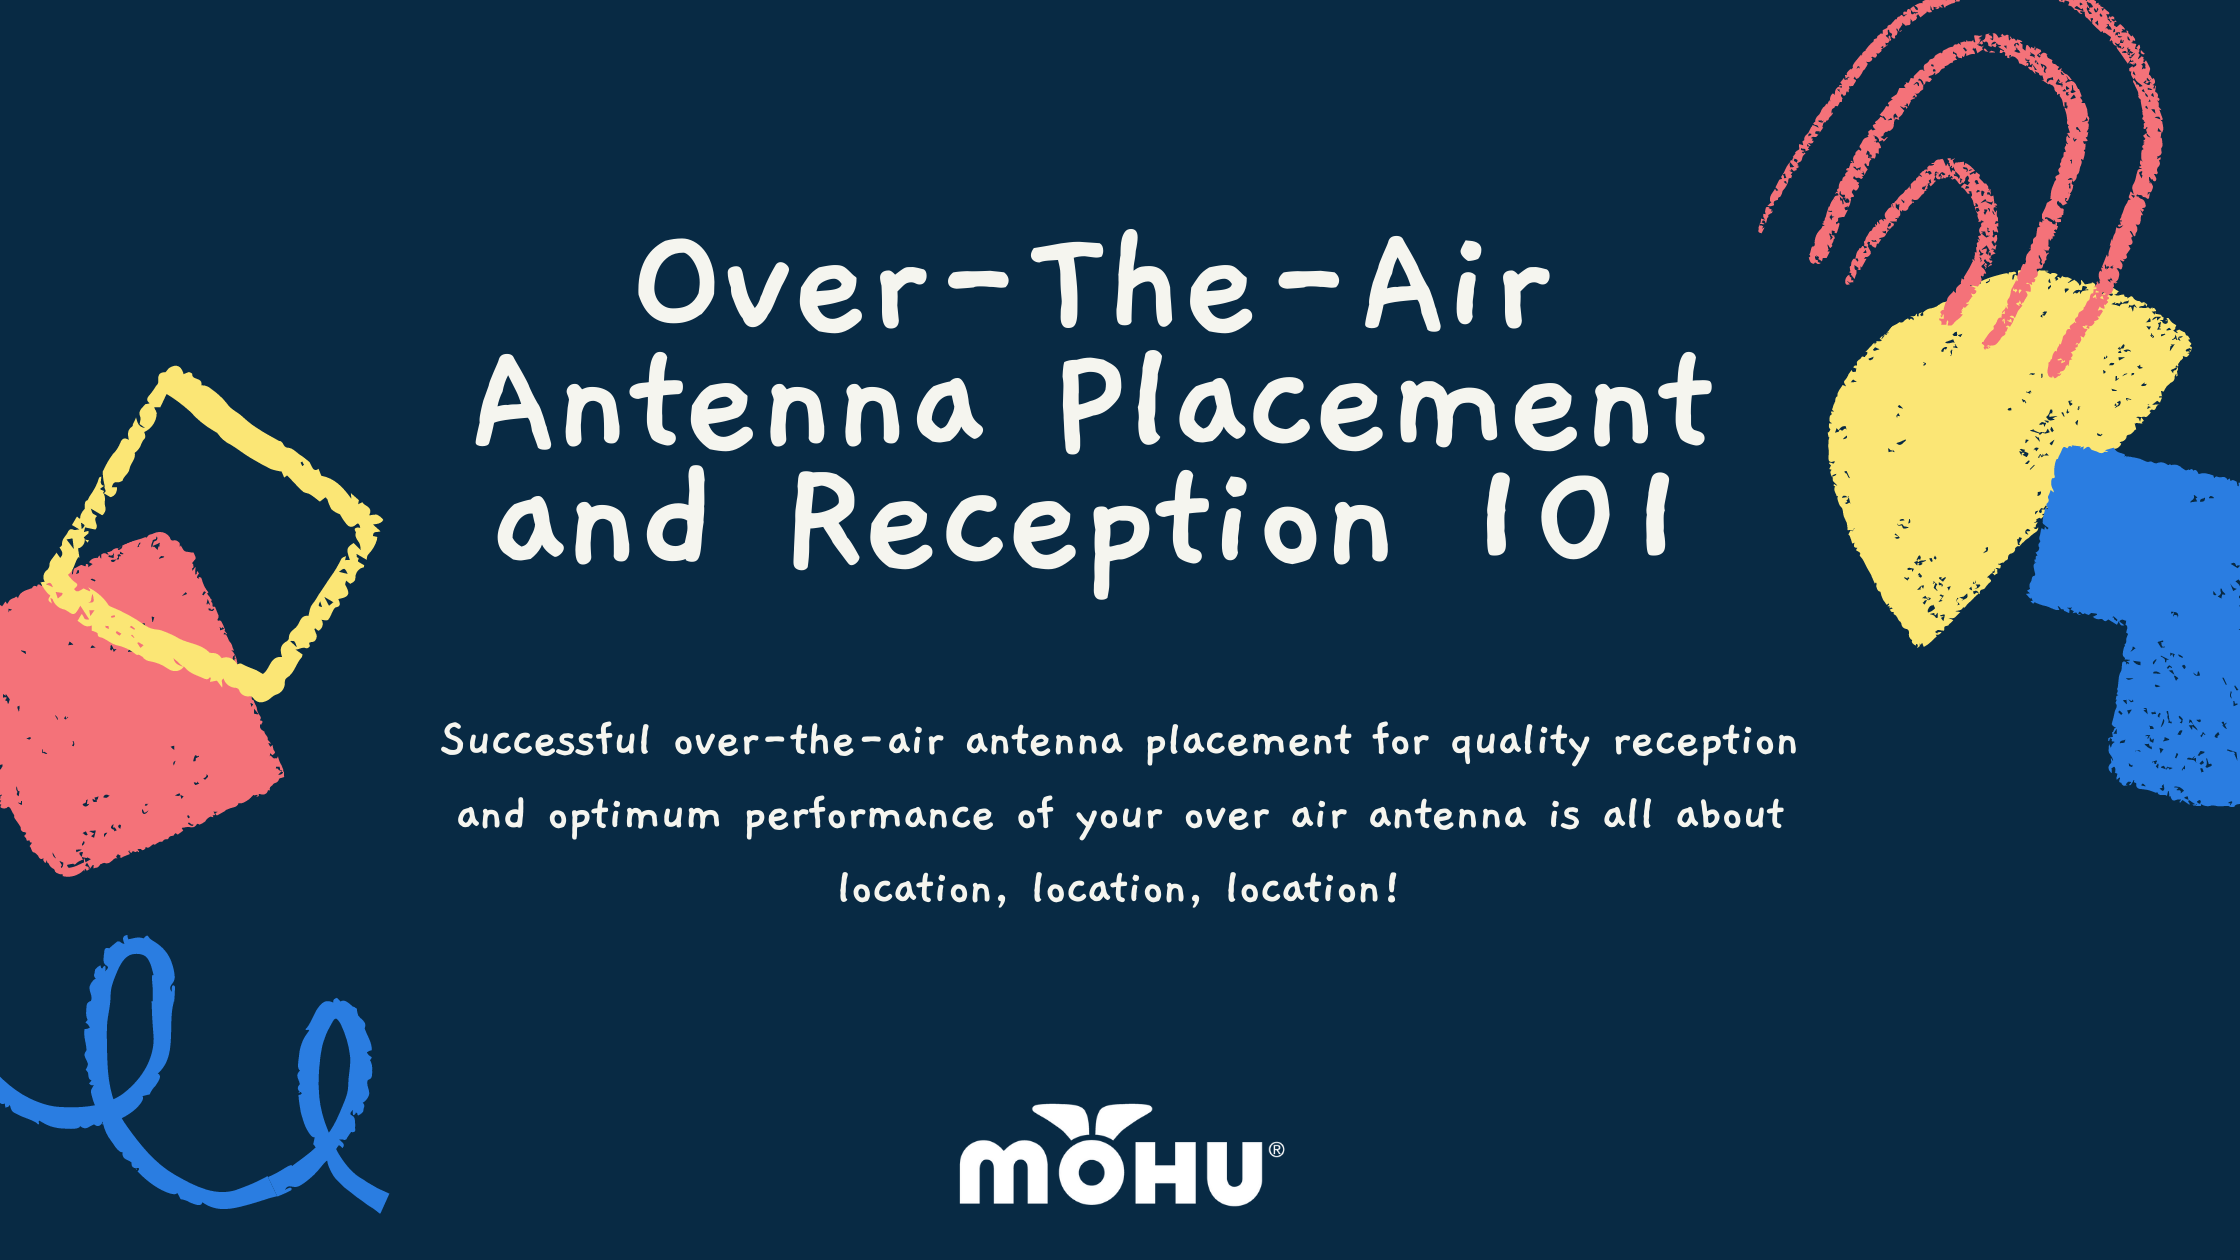 Successful over-the-air antenna placement for quality reception and optimum performance of your over air antenna is all about location, location, location! Mohu